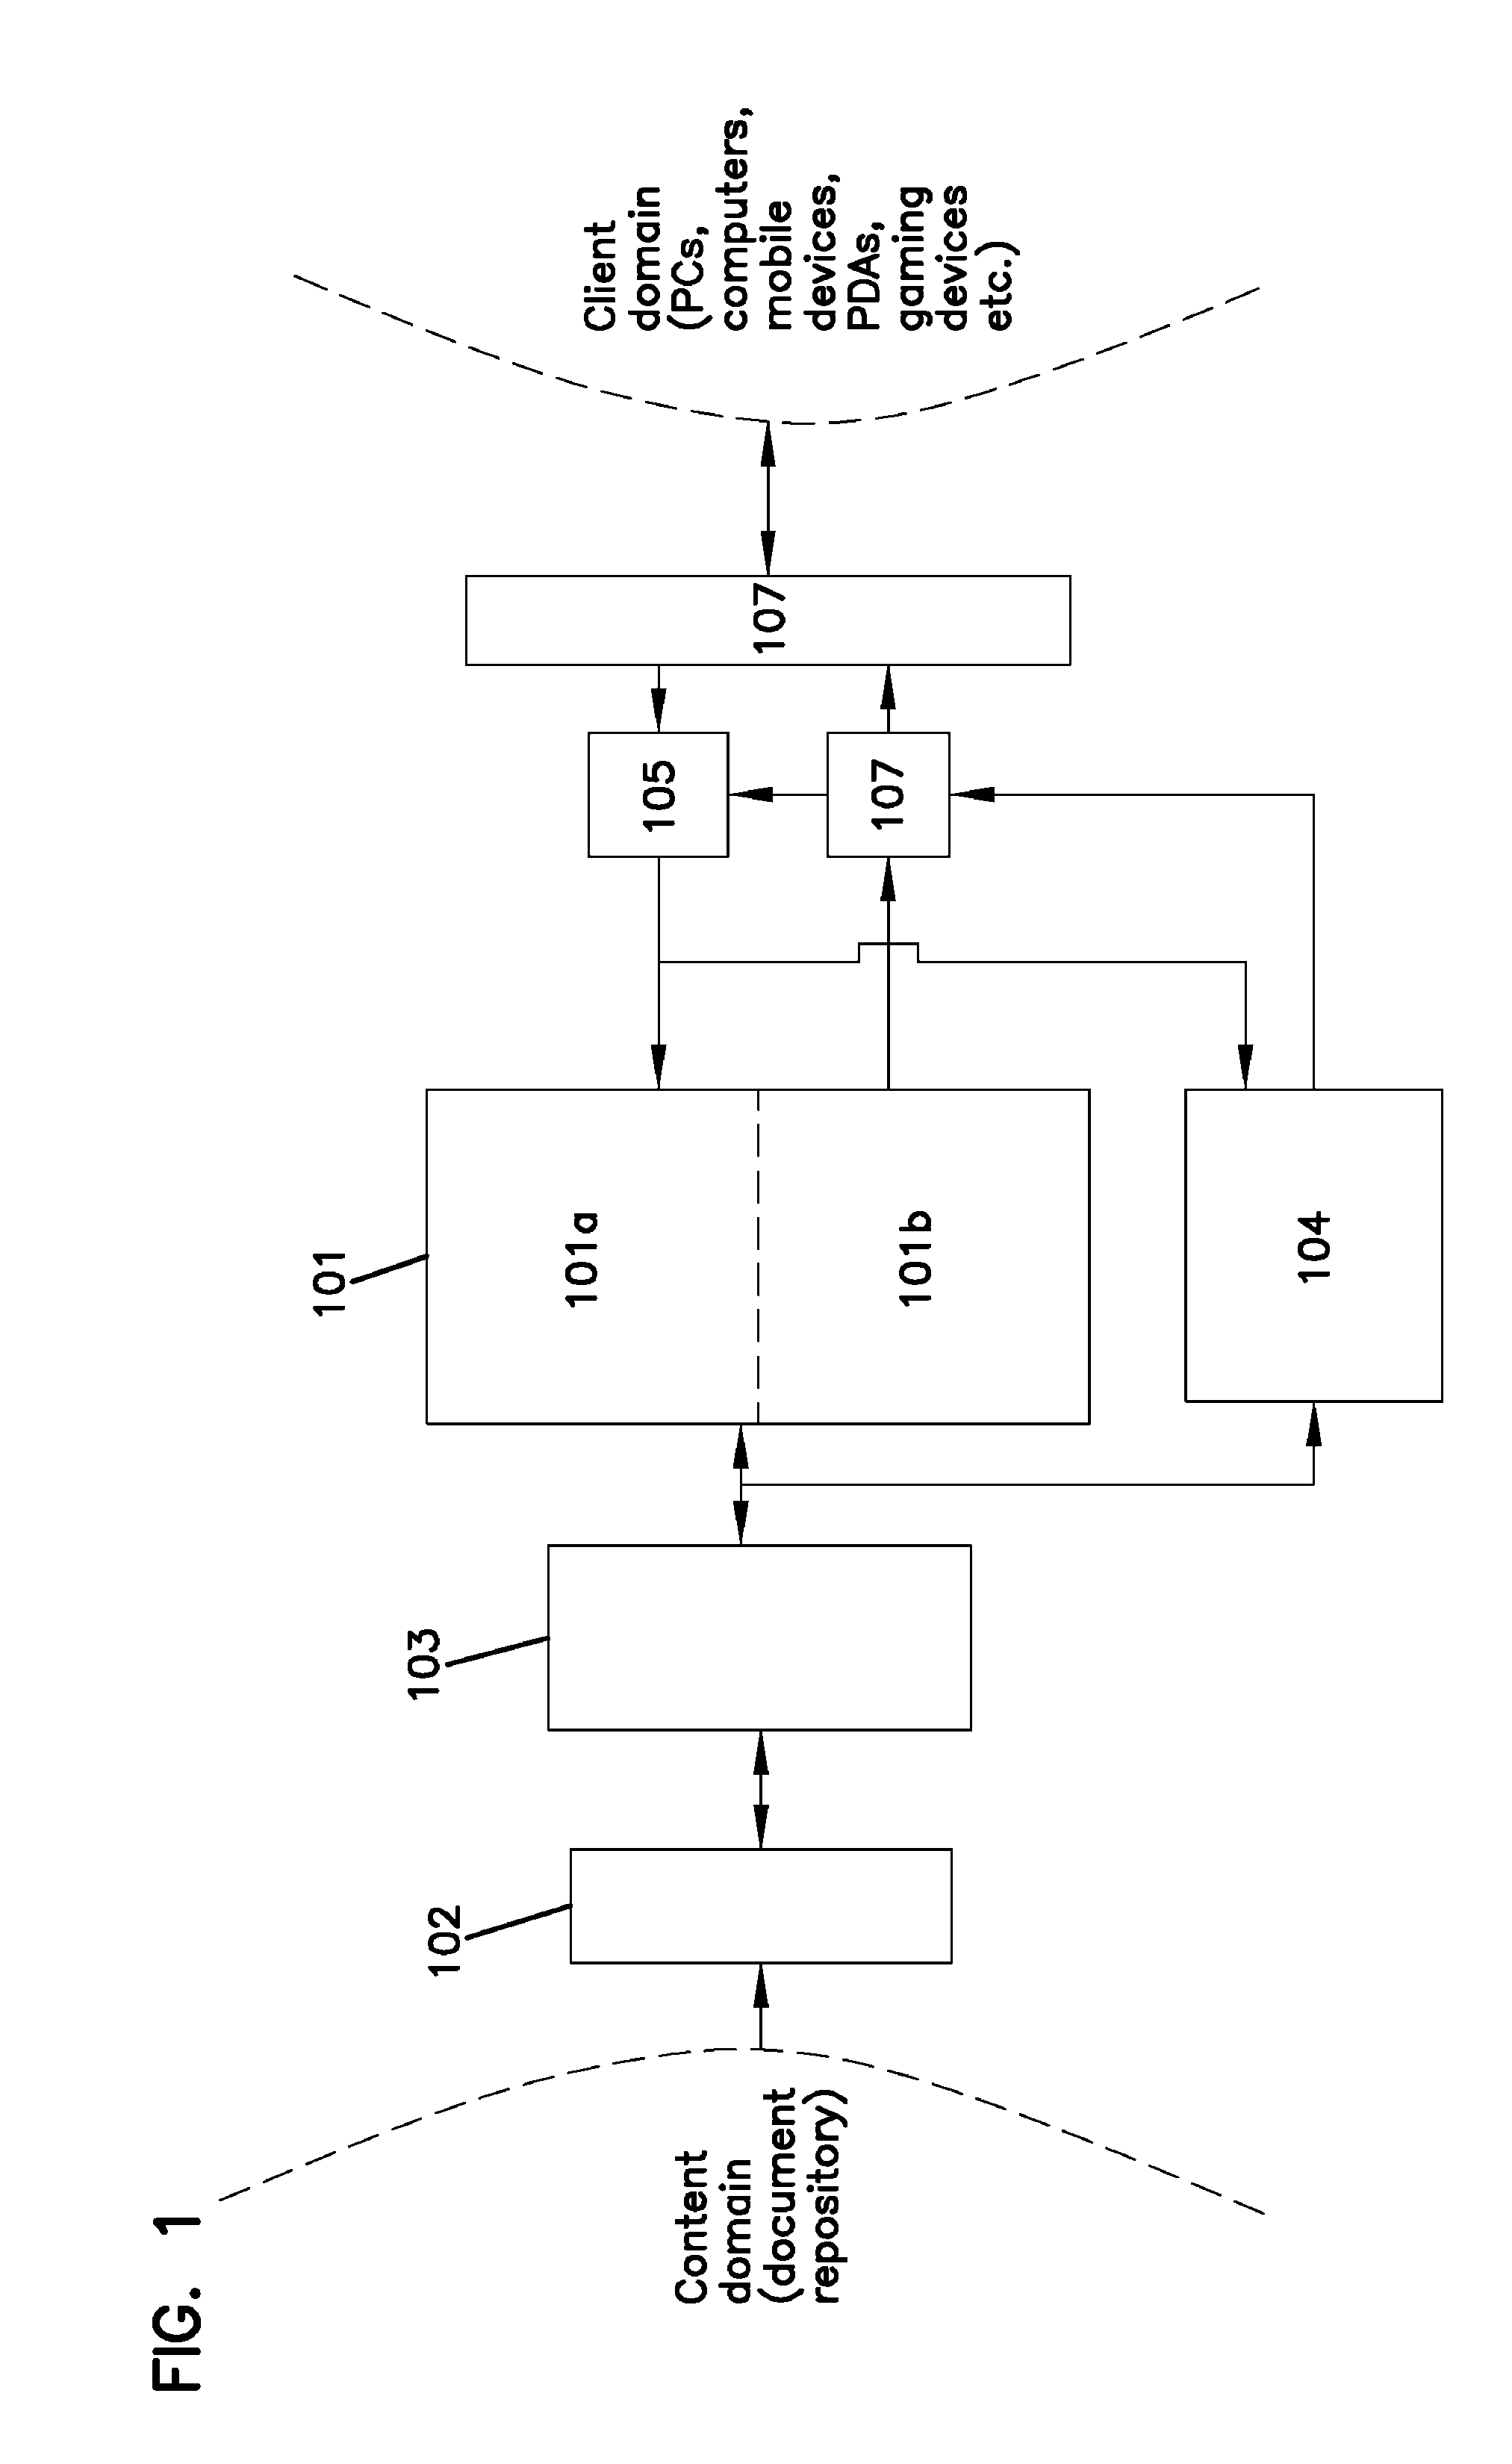 Method for improving search efficiency in enterprise search system